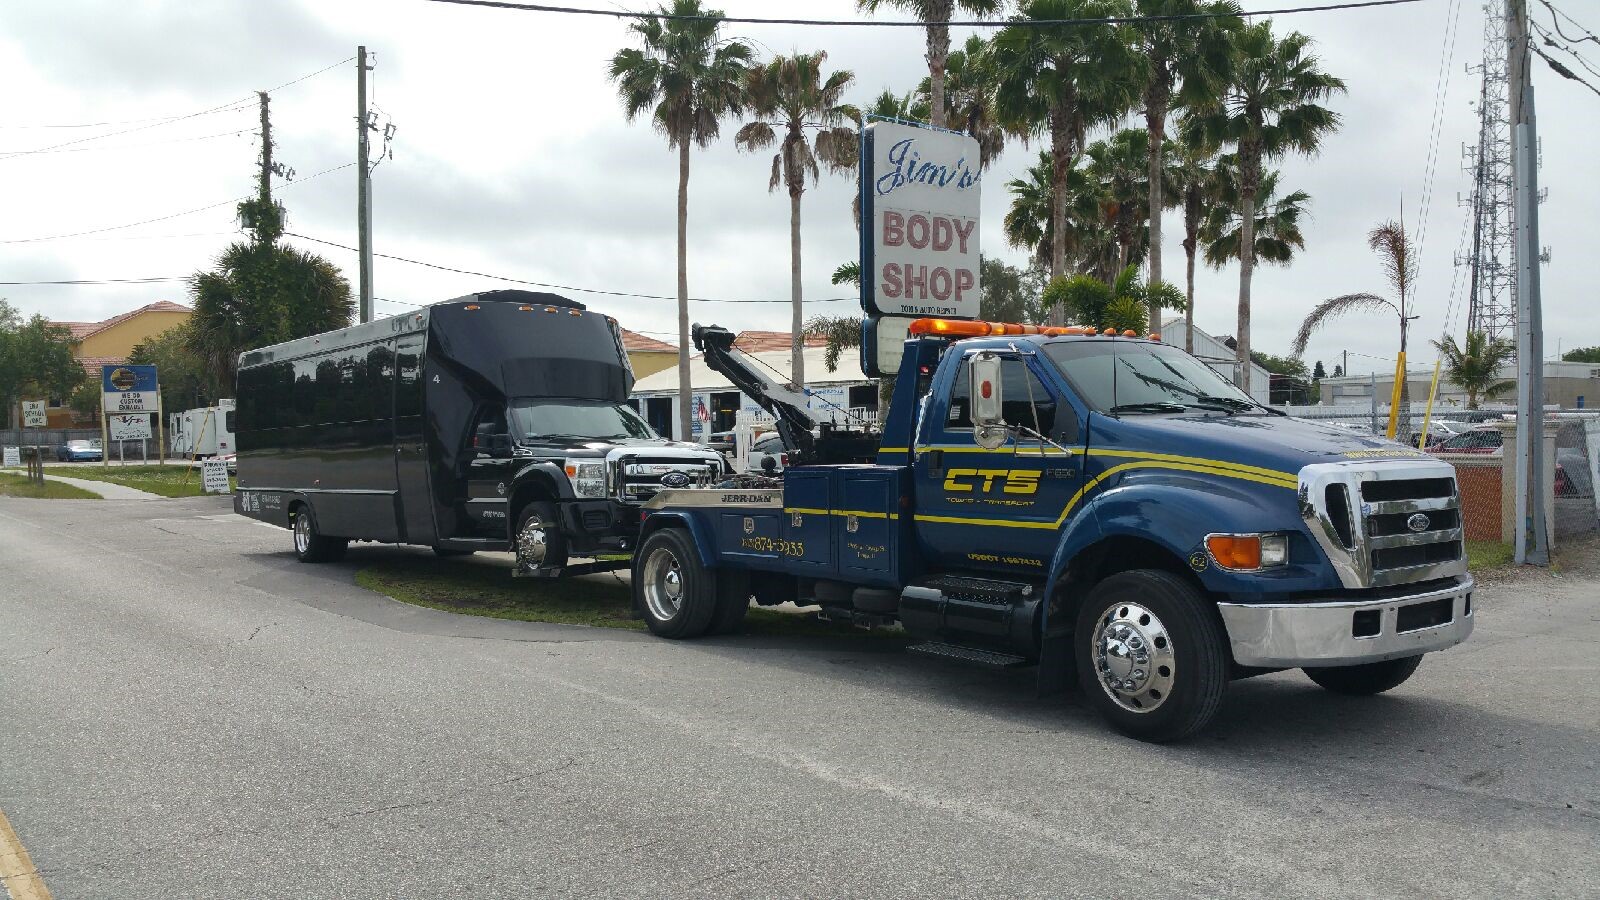 Medium Duty Party Bus being towed by CTS Tow Truck